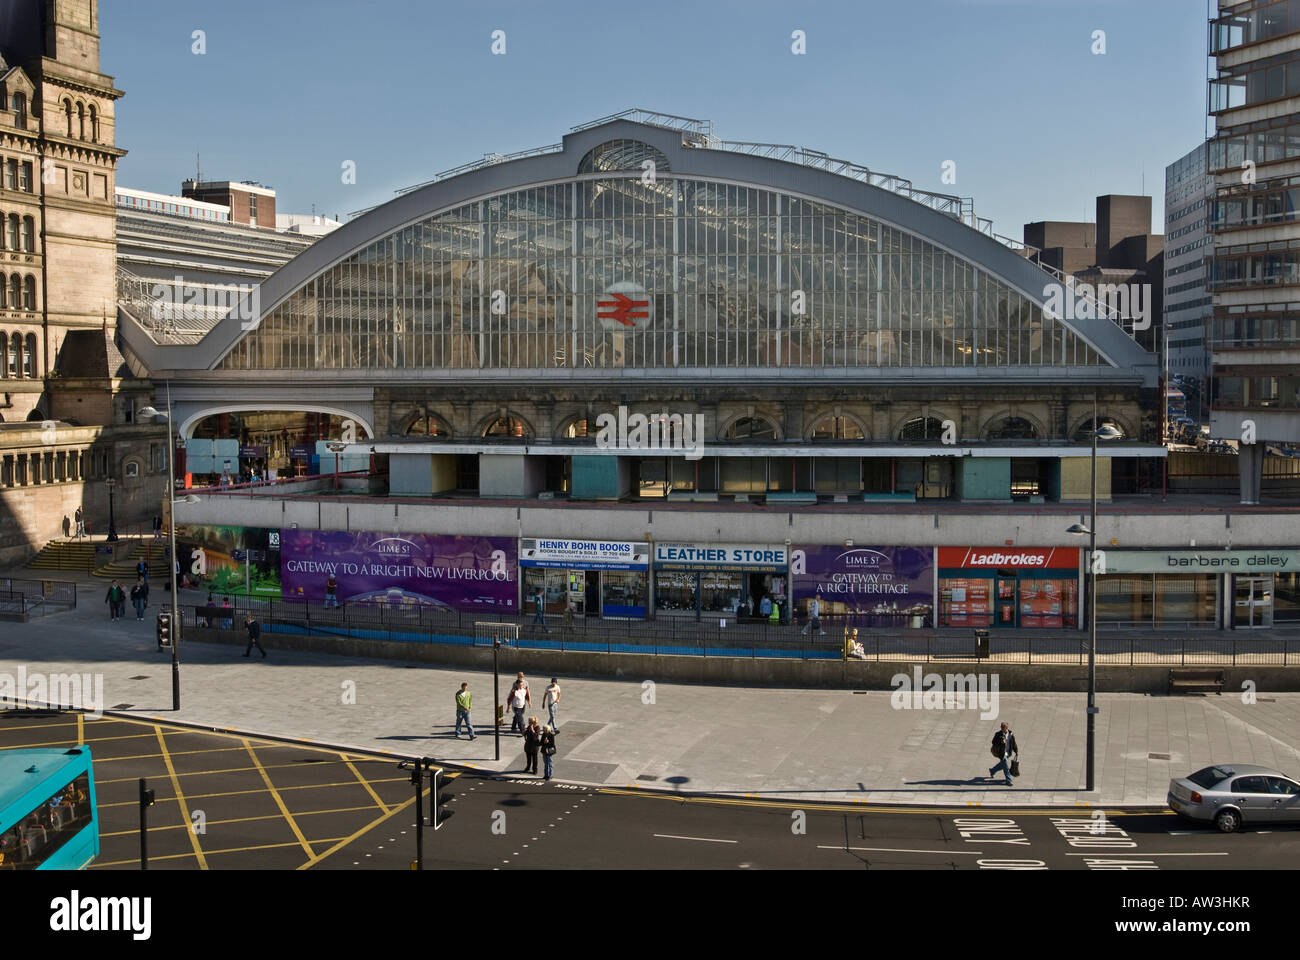 Lime street station concourse Liverpool. Re-designed since this picture was taken. Stock Photo